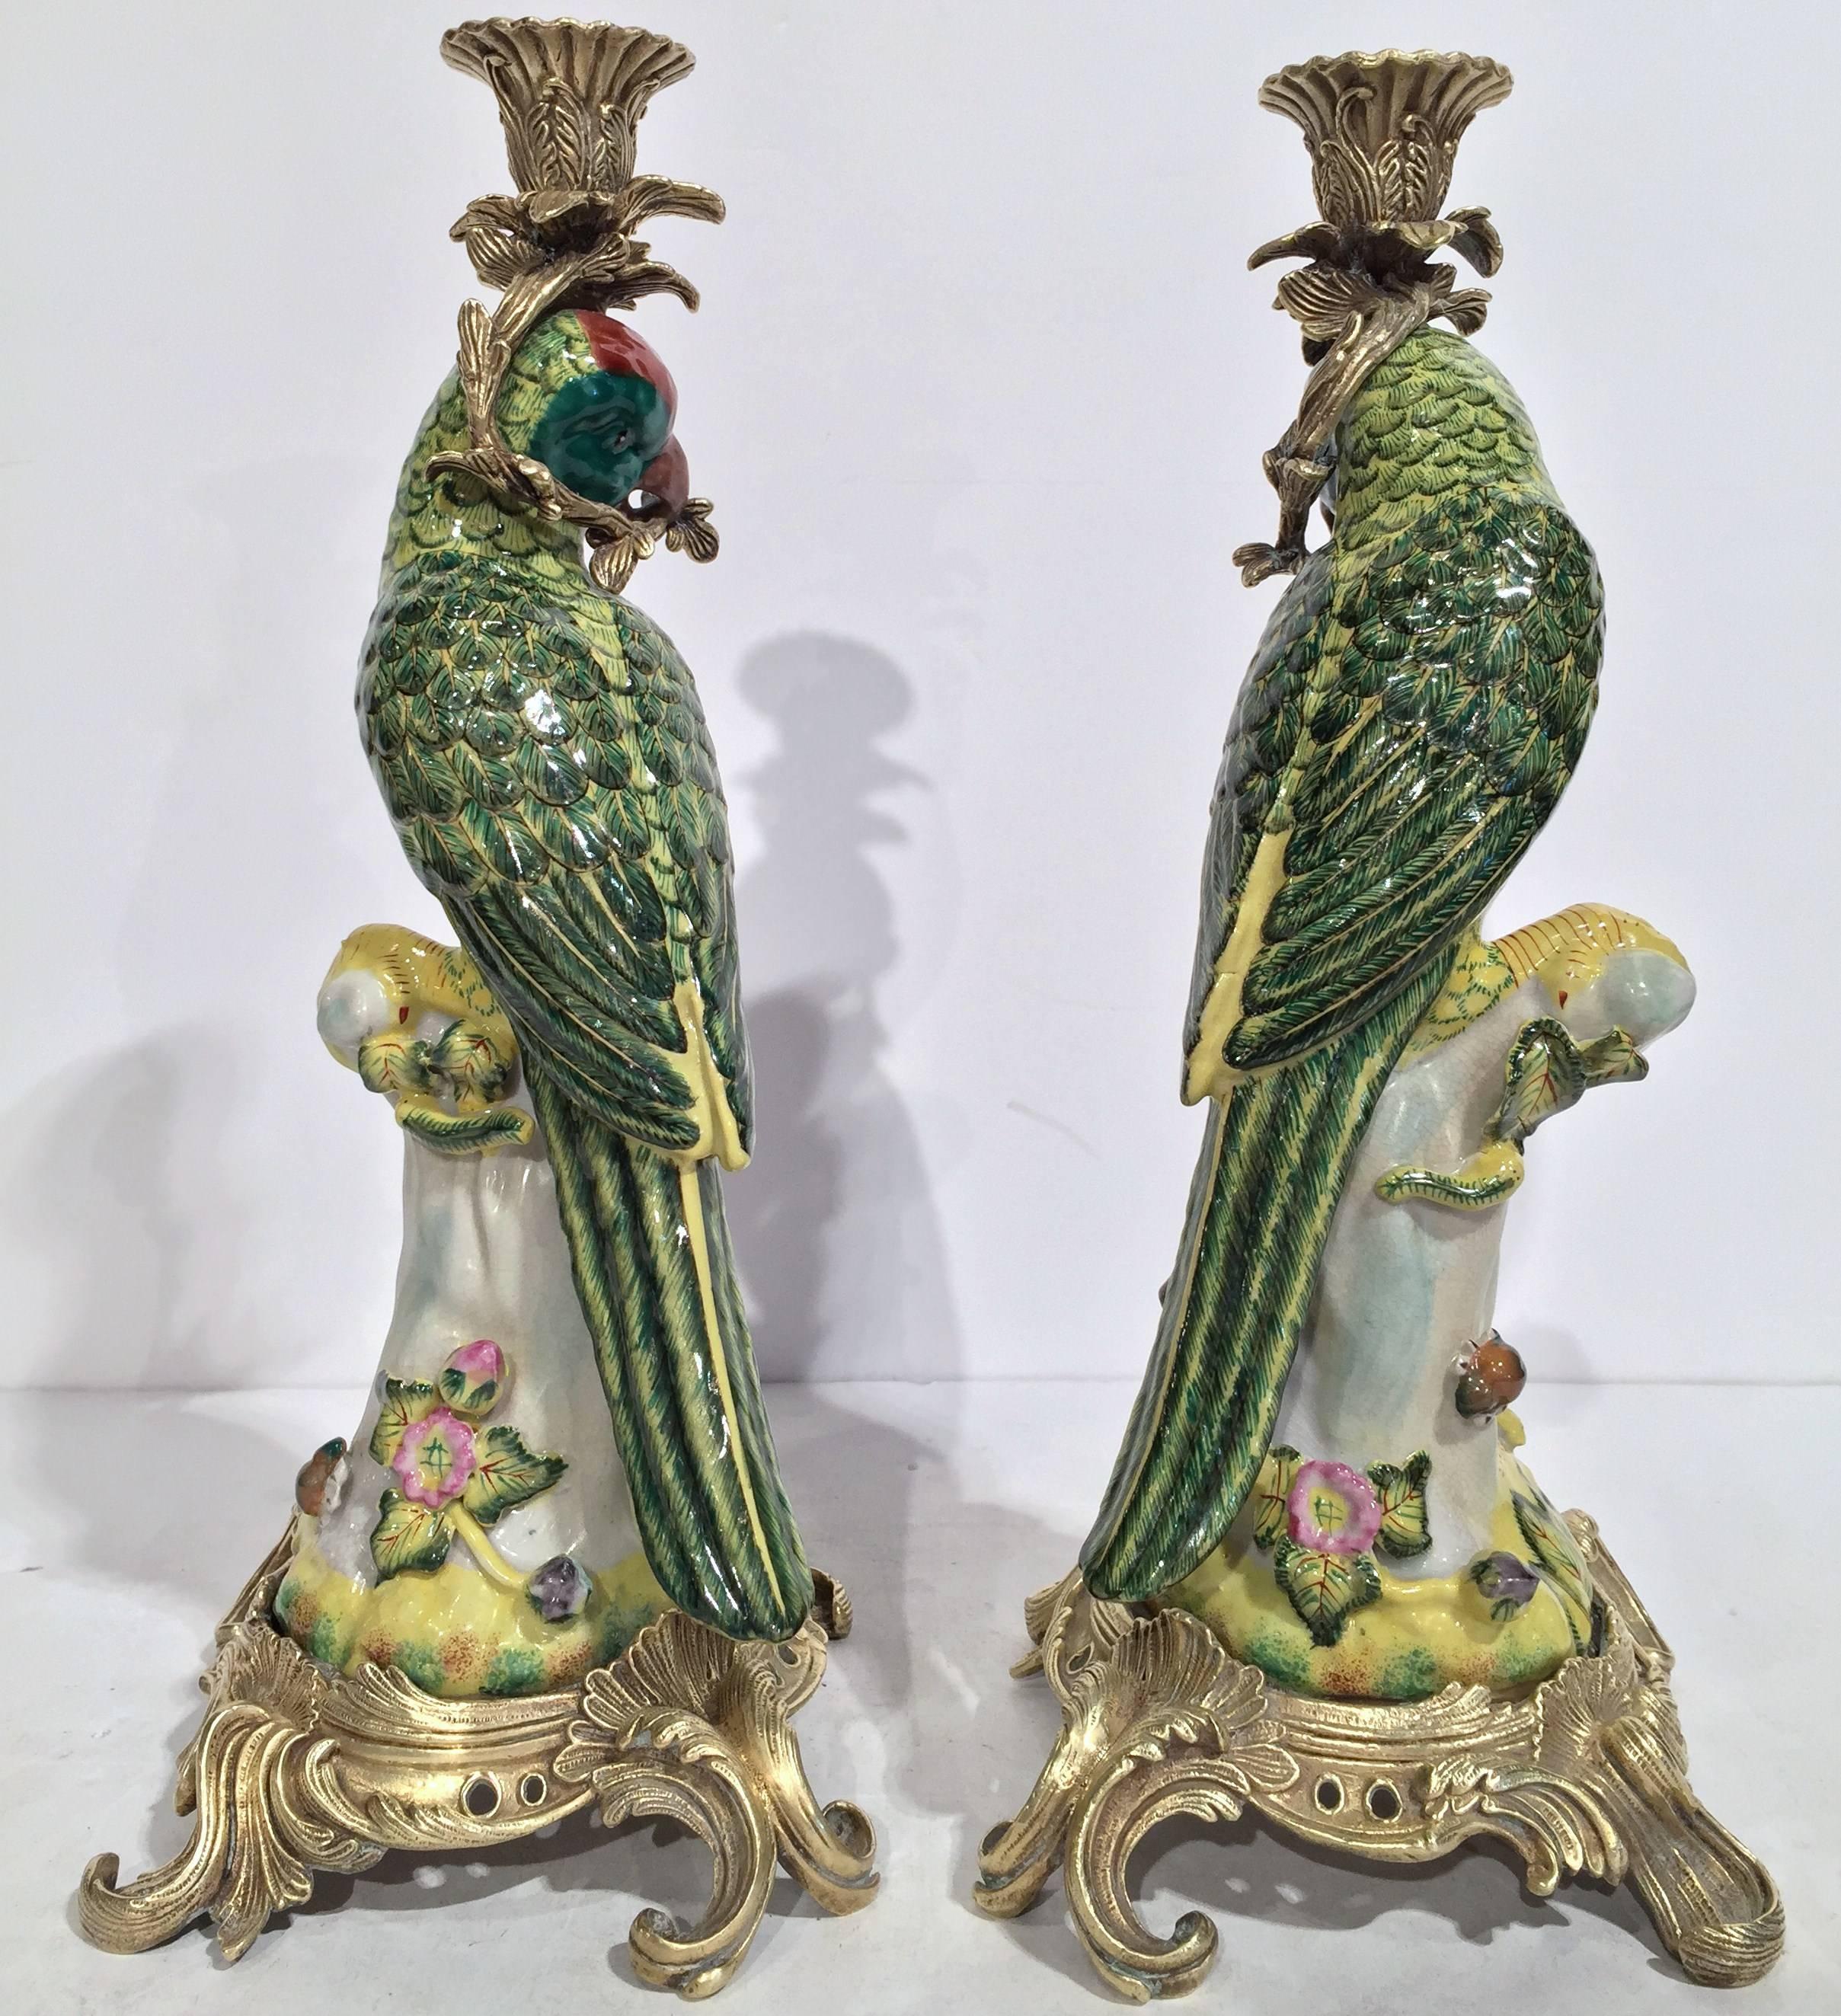 19th Century Pair of Antique Faience Candle Holders with Parrots on Bronze Bases 